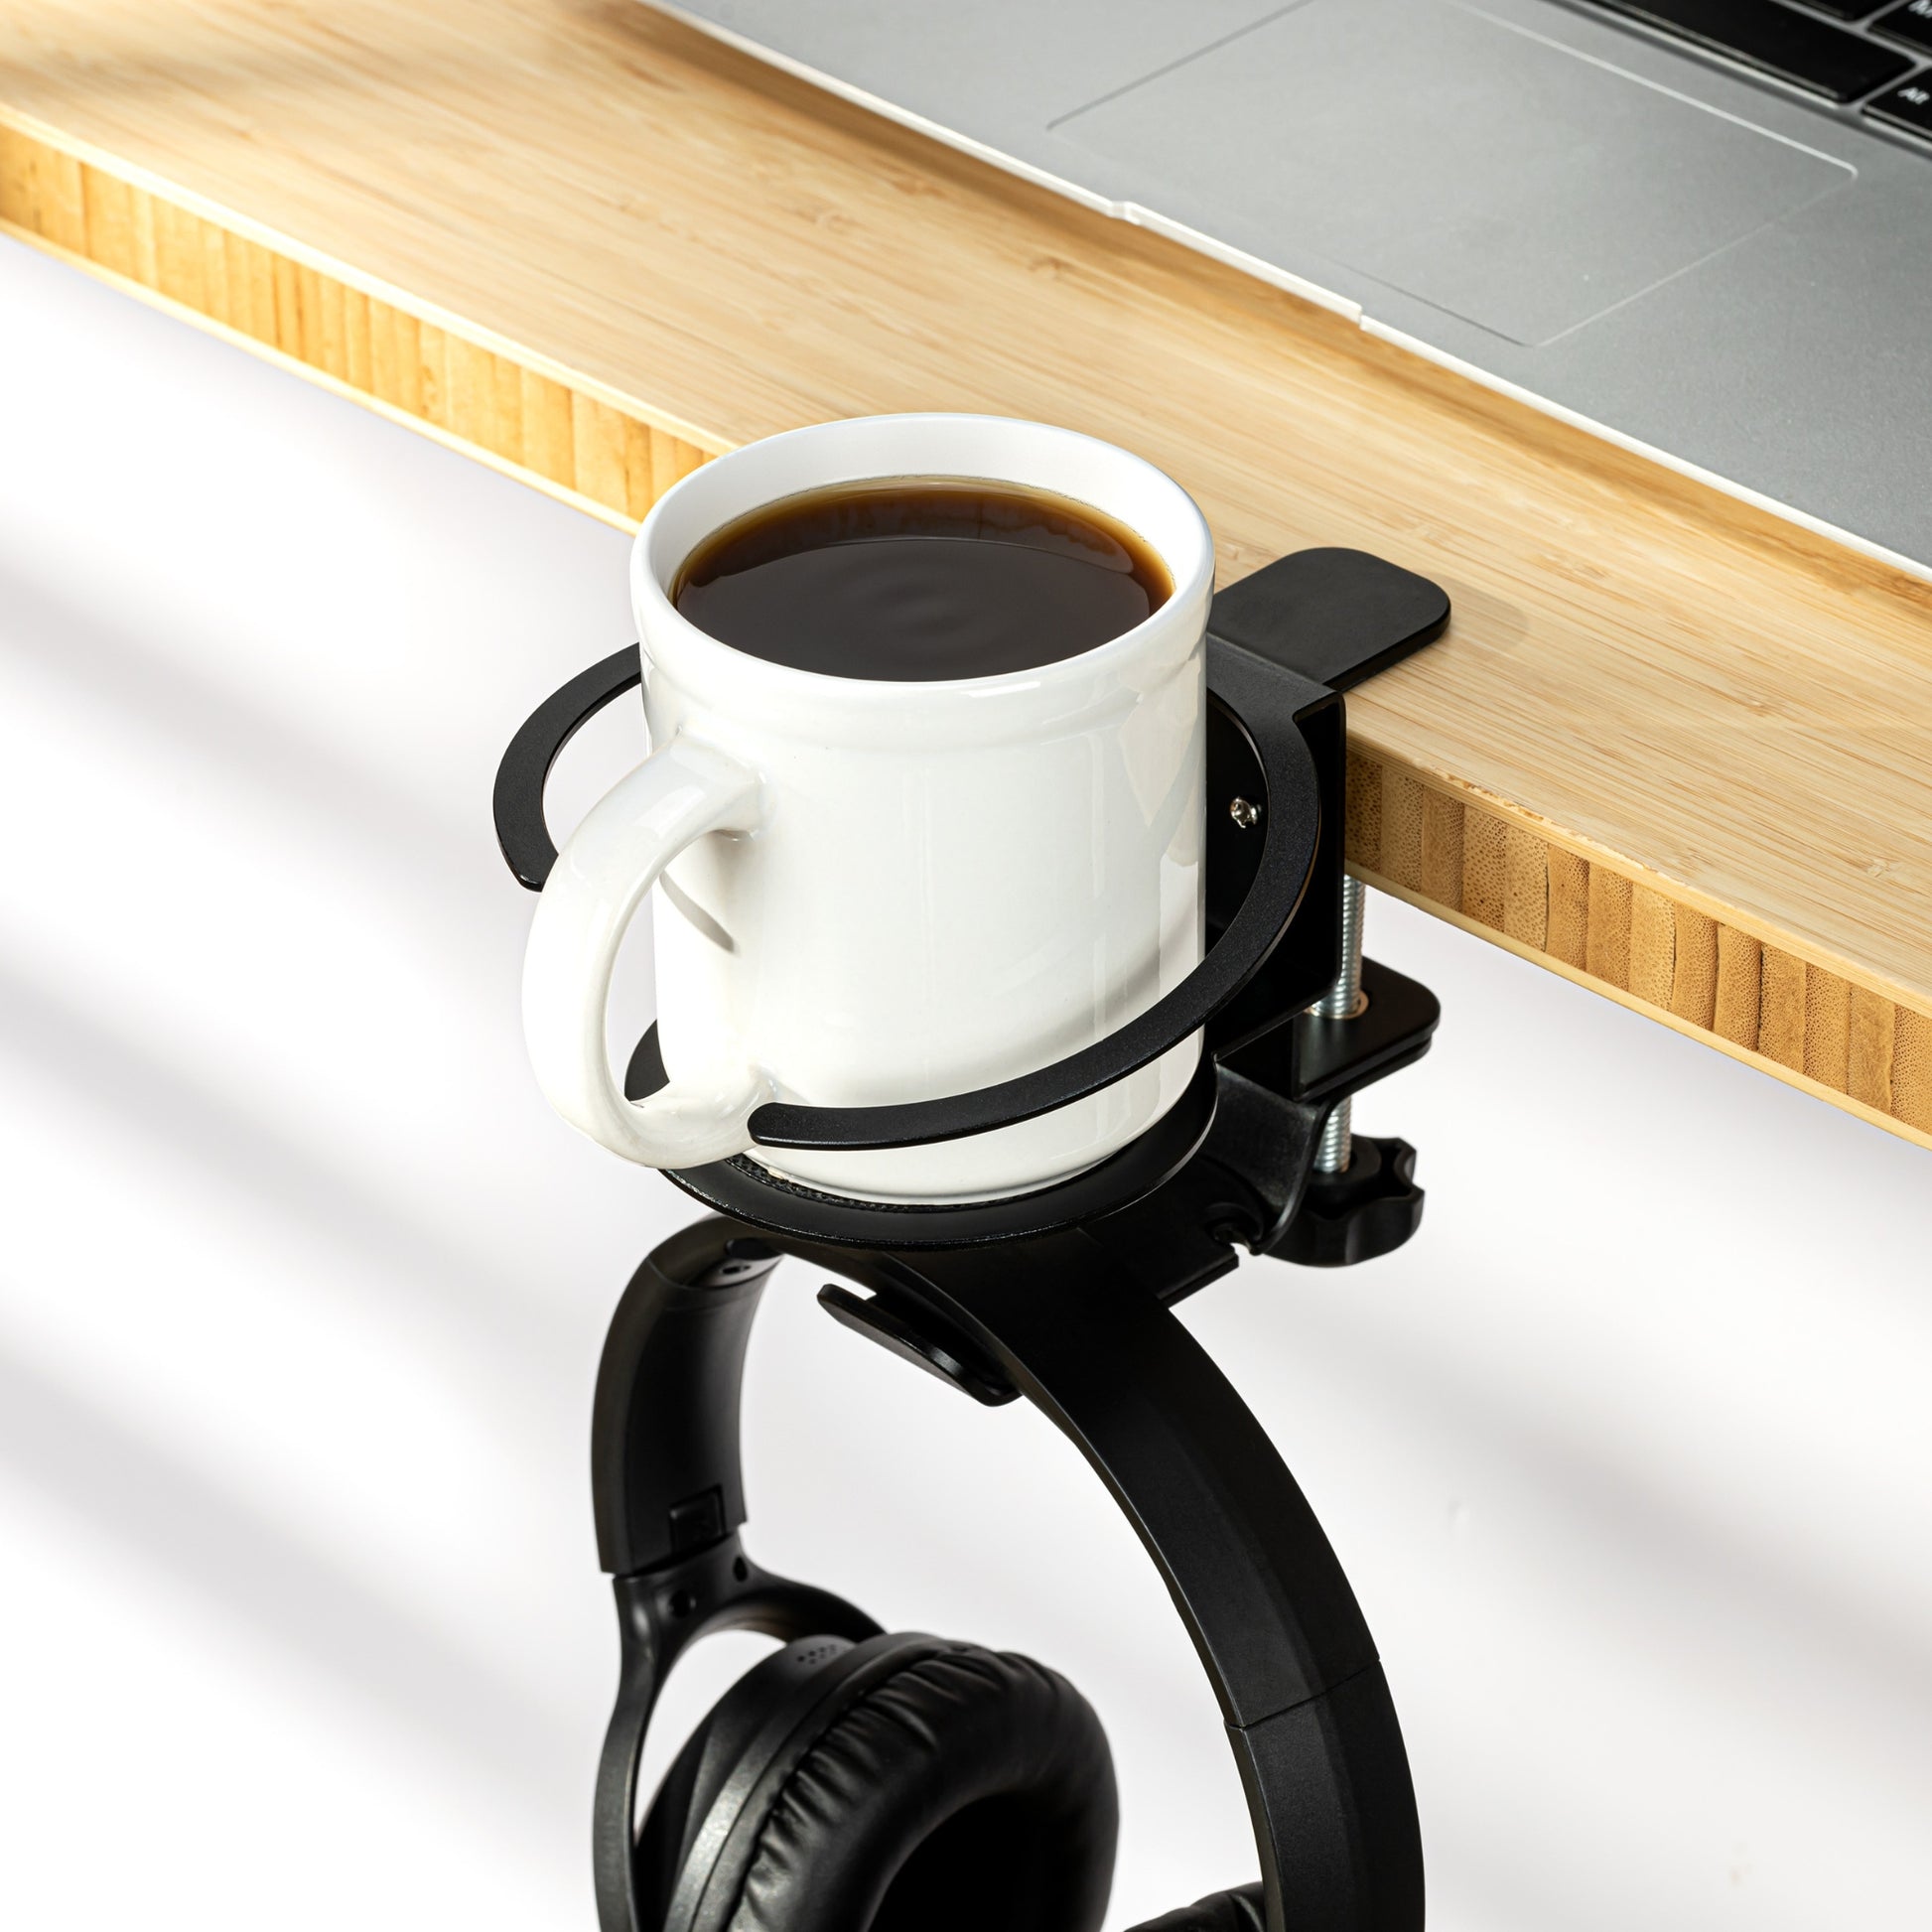 Universal Headphone Hanger with Cup Holder